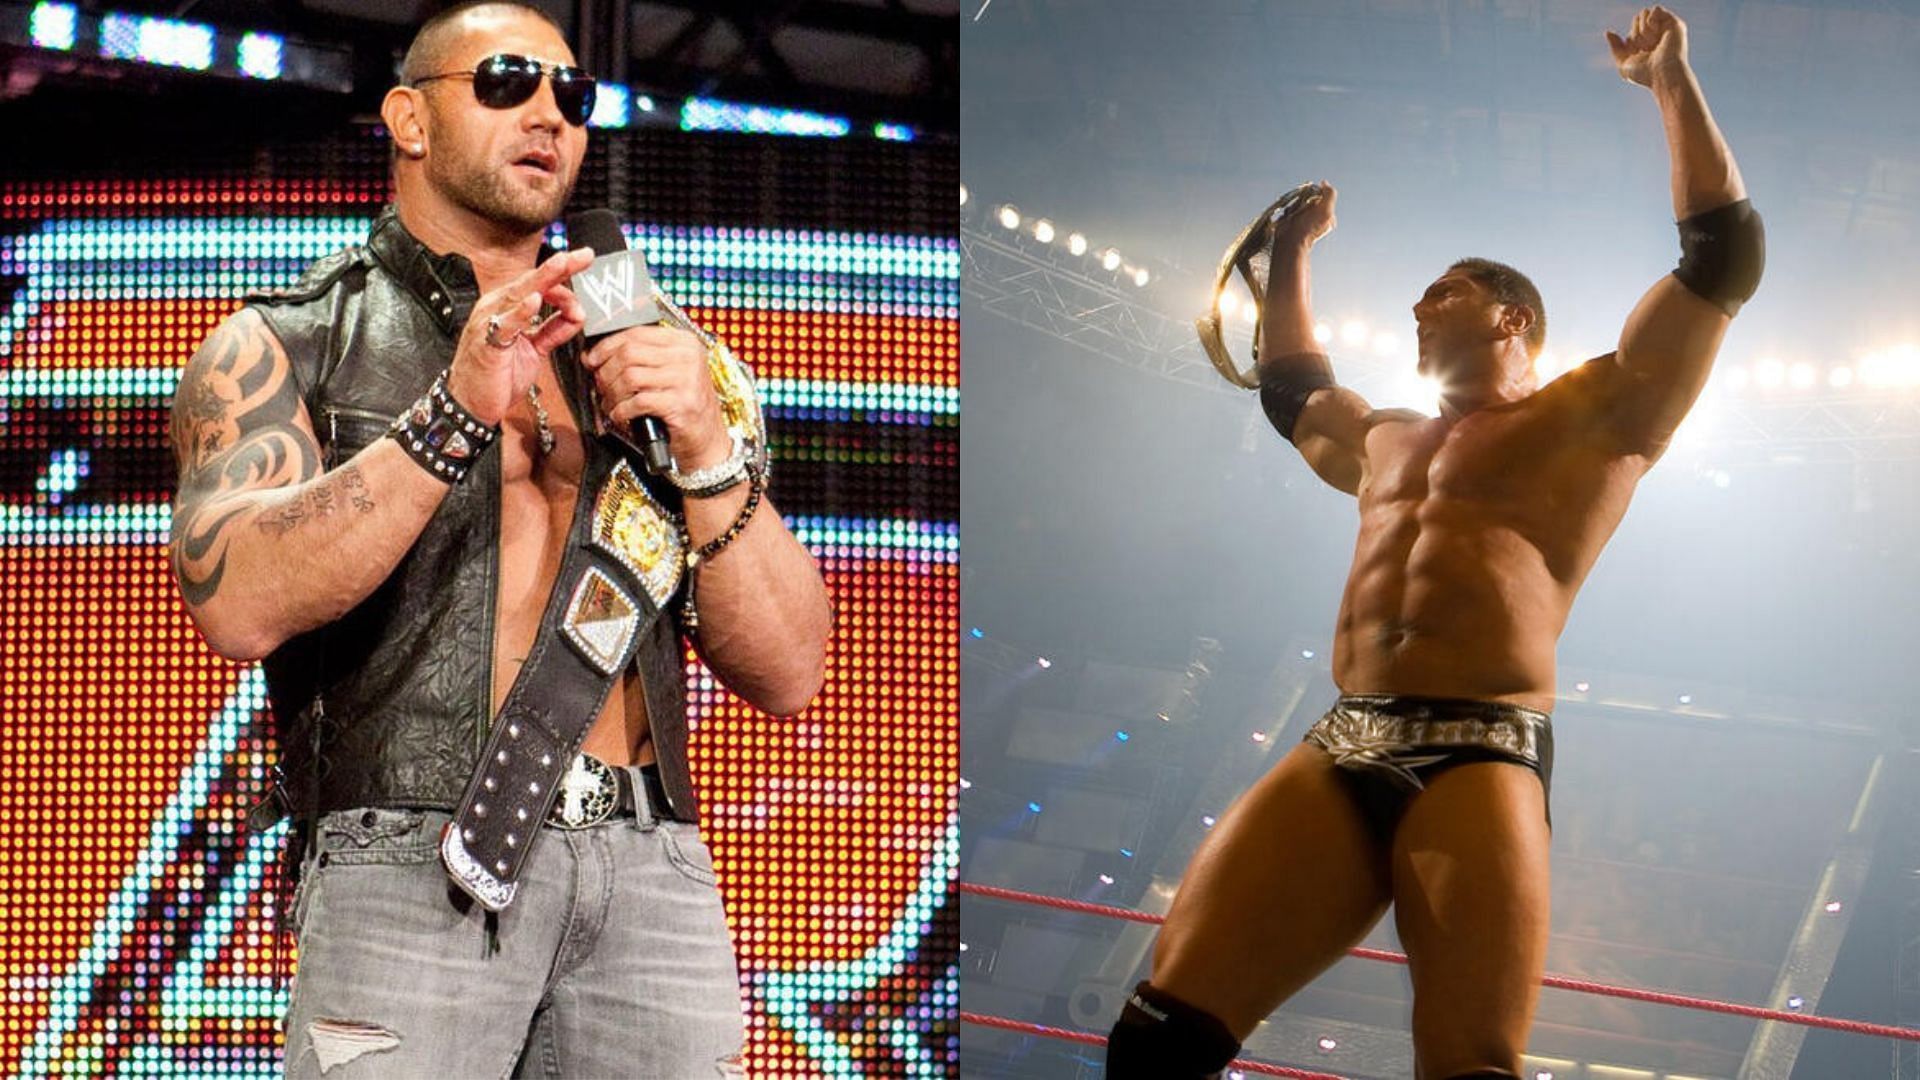 Batista is a multi-time WWE World Champion